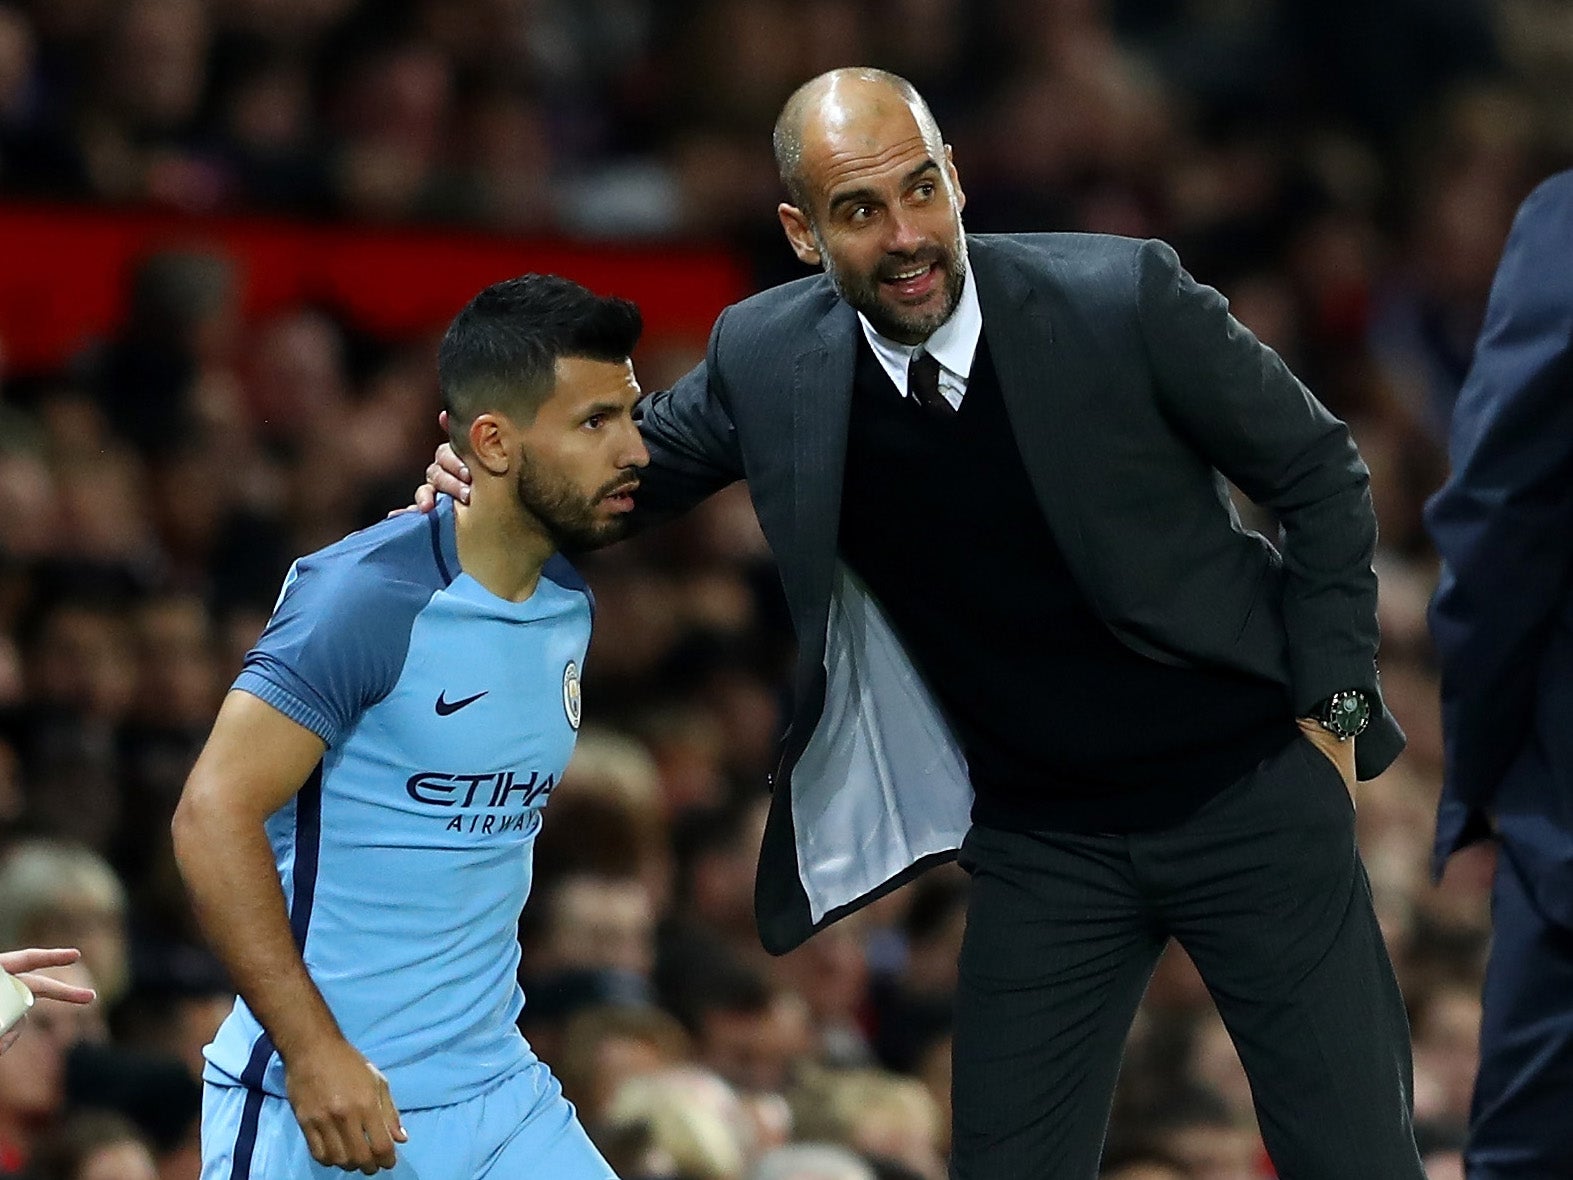 Guardiola was unable to confirm if Aguero signed a new contract last season